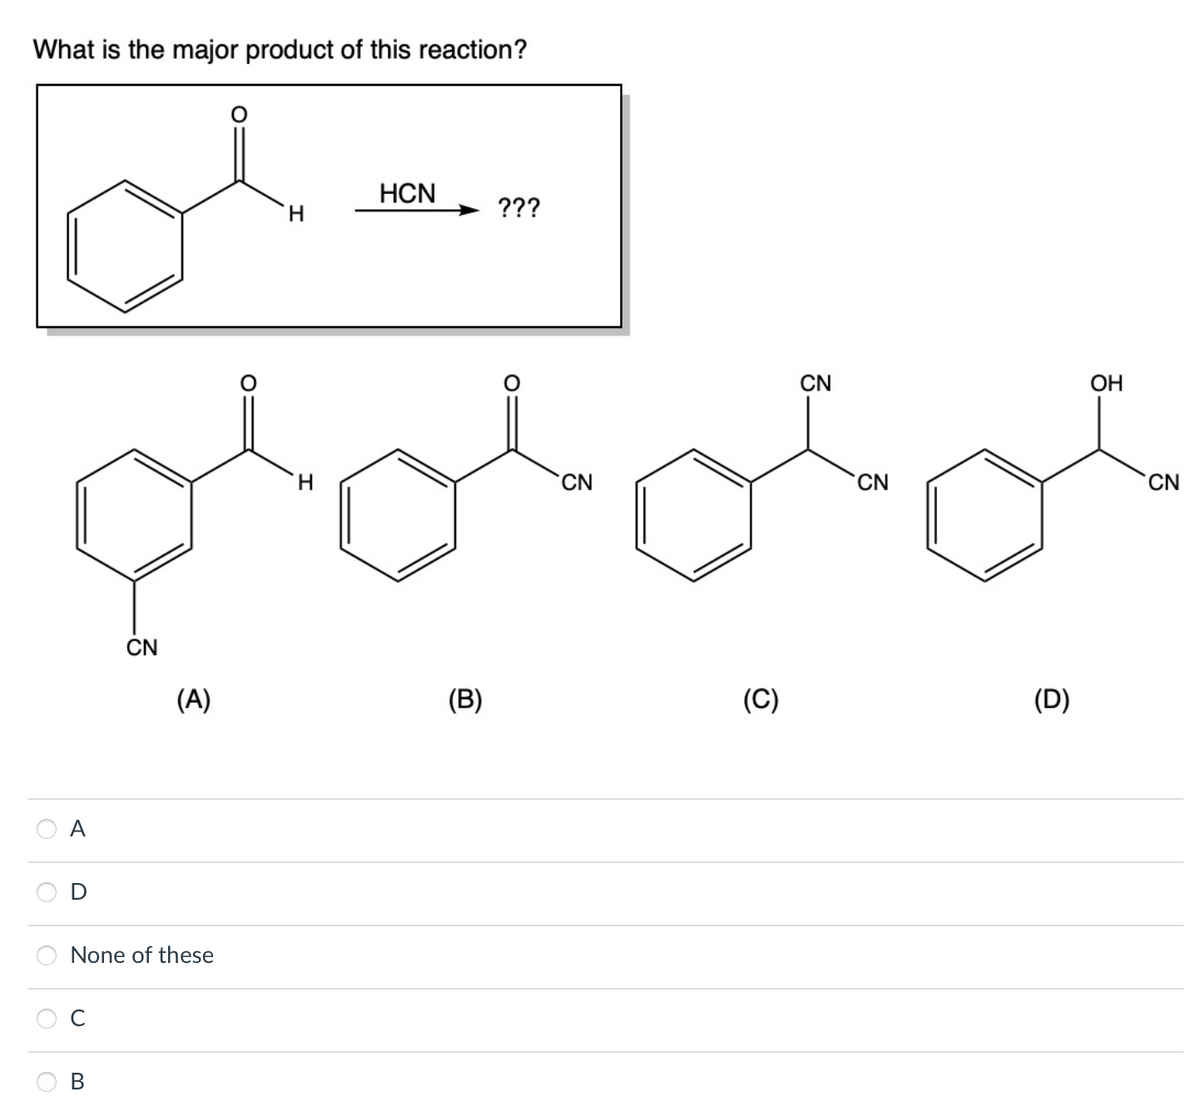 What is the major product of this reaction?
A
C
CN
None of these
B
(A)
H
H
HCN
(B)
???
CN
(C)
CN
CN
(D)
OH
CN